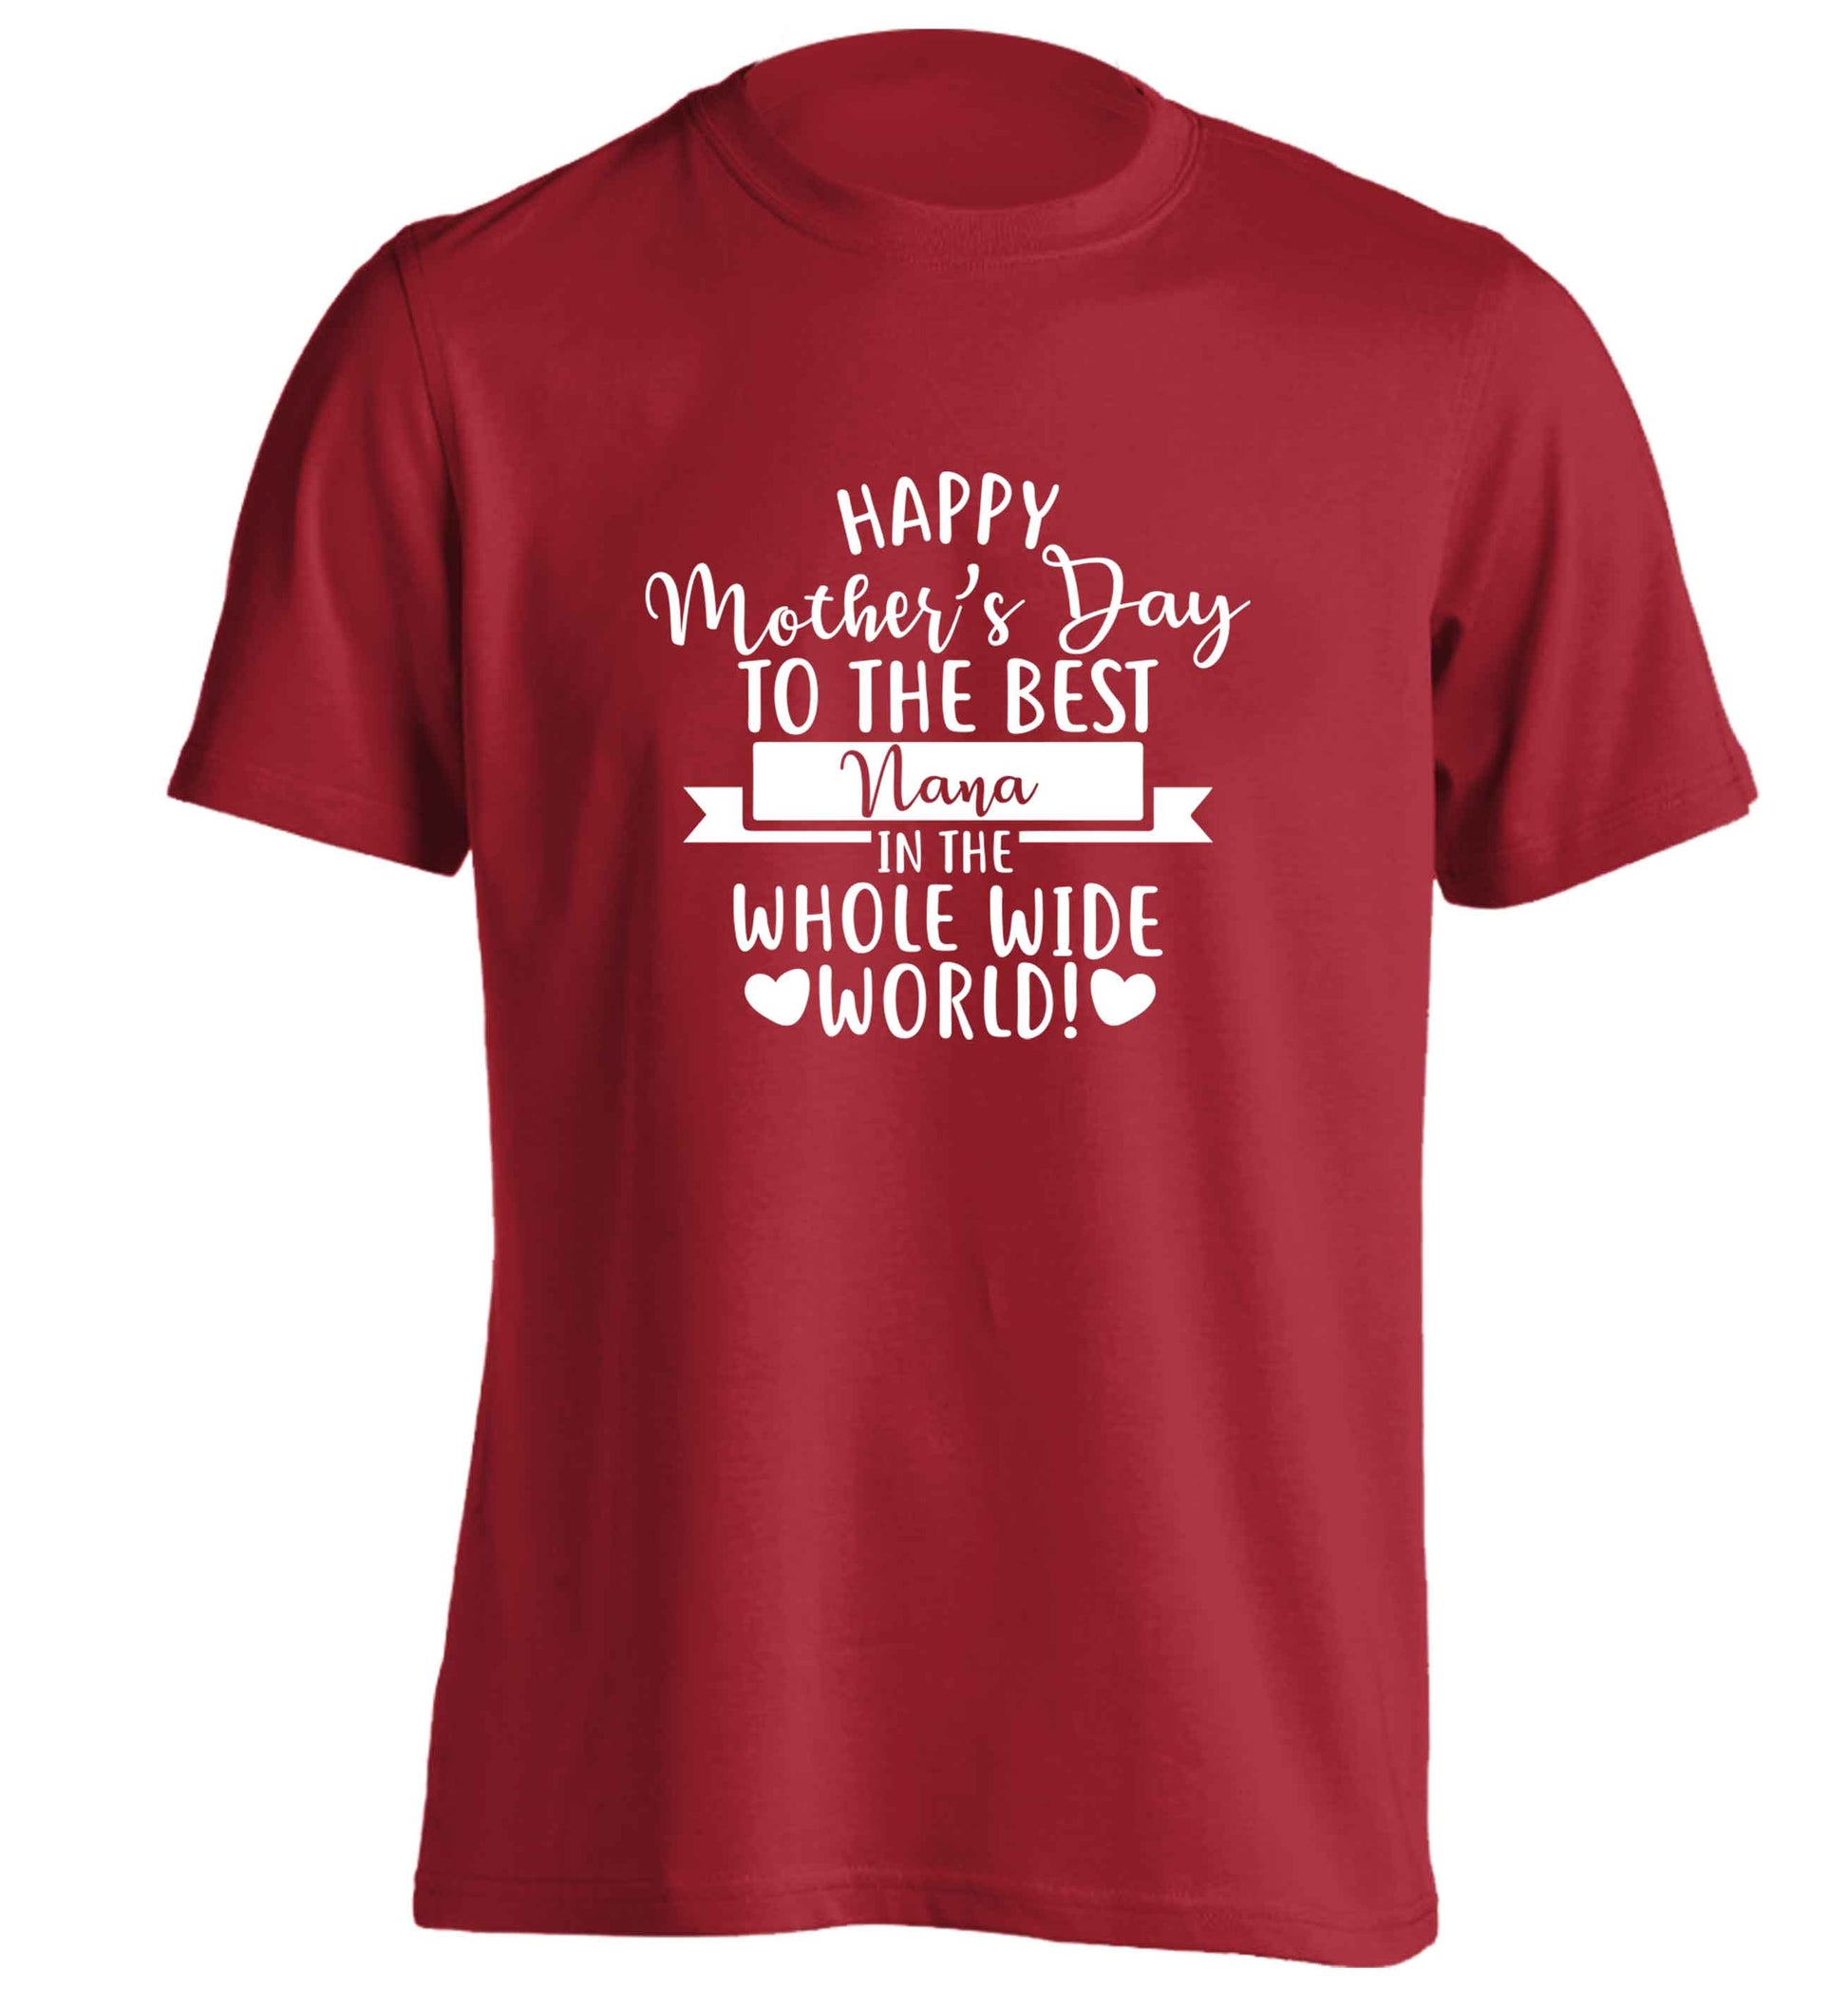 Happy mother's day to the best nana in the world adults unisex red Tshirt 2XL